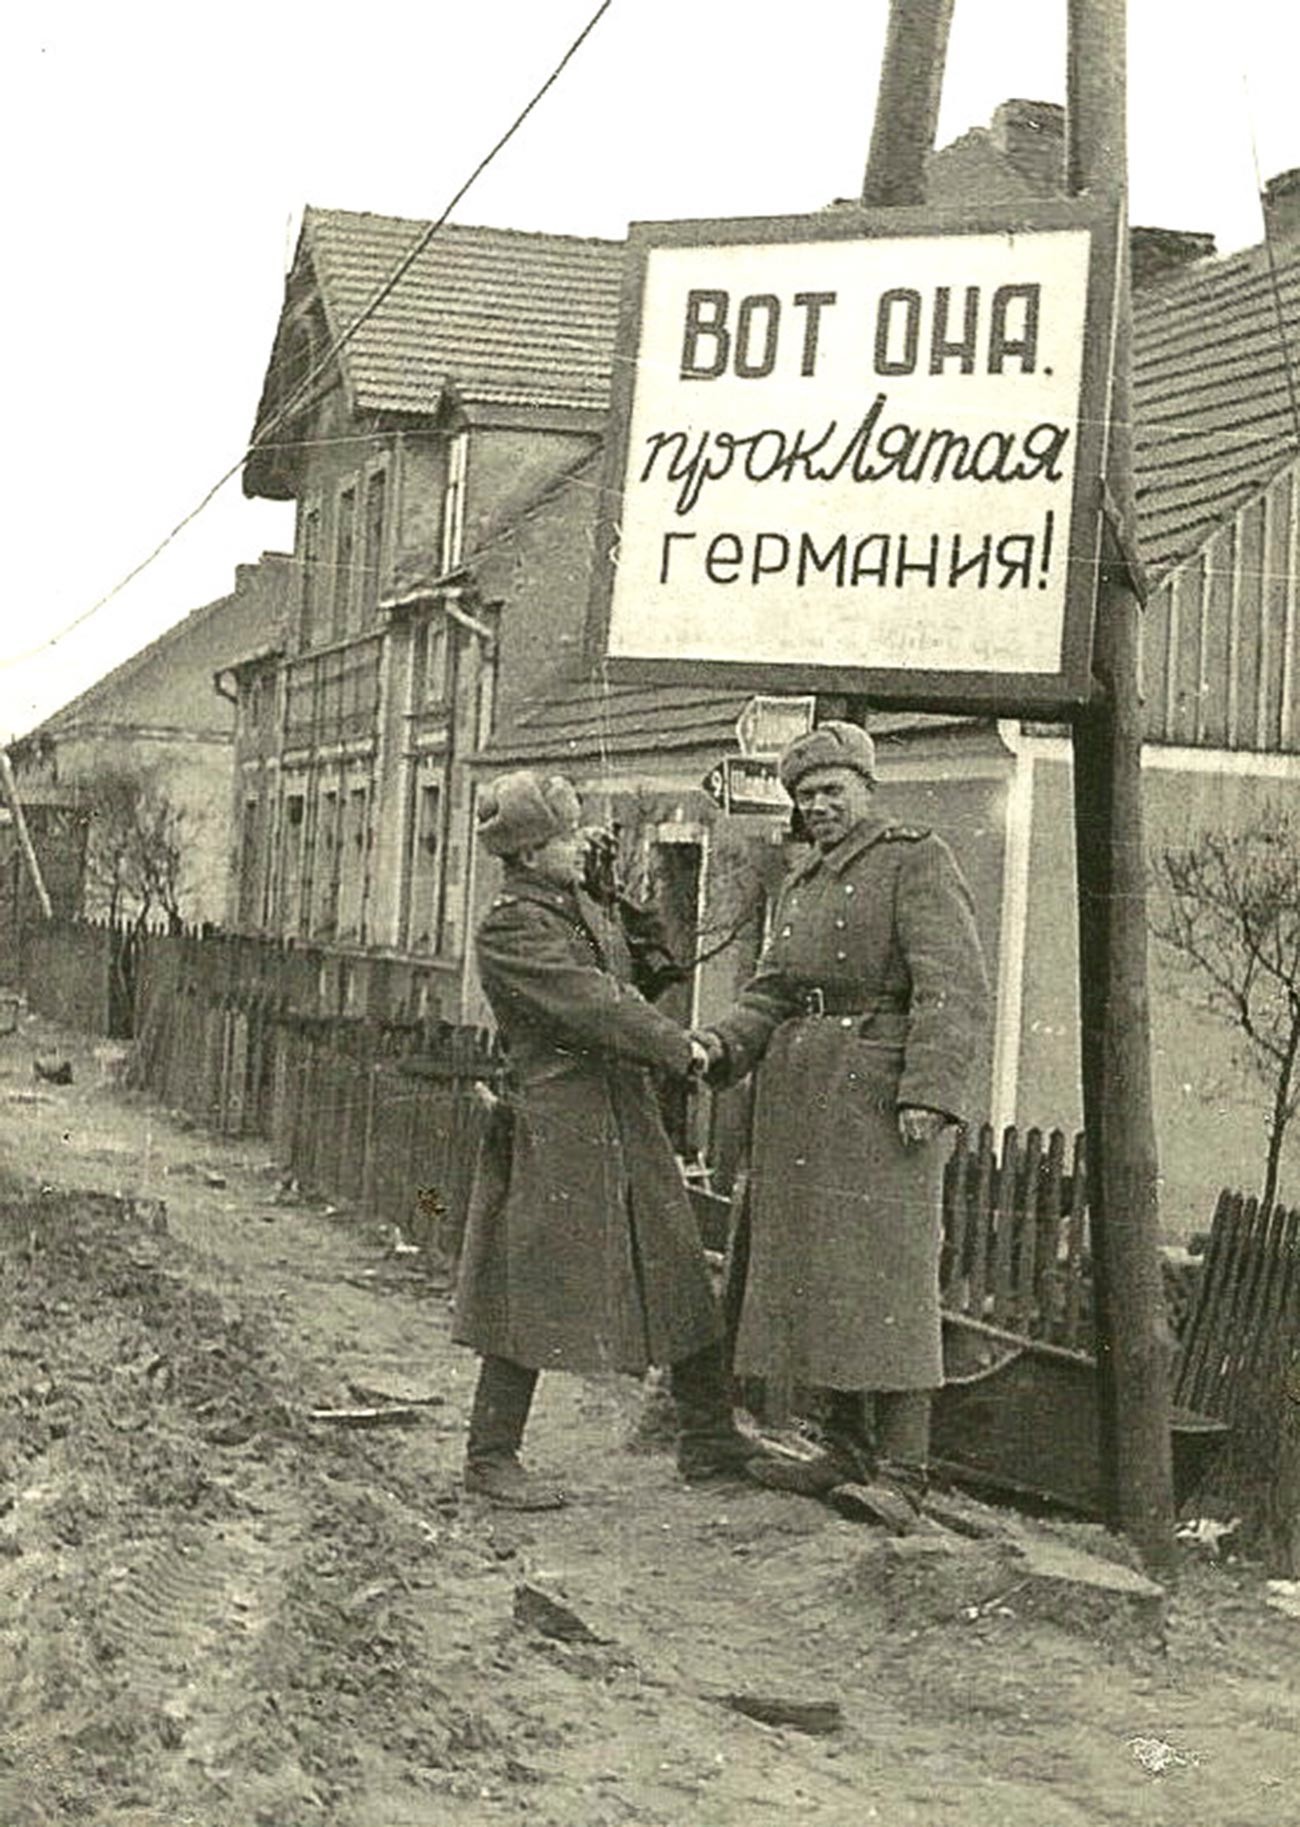 The sign reads: “There she is, cursed Germany!” War videographers Ilya Arons (left) and Boris Dementyev at the former border between Poland and Germany during the filming of ‘Battles in Pomerania’ in April 1945